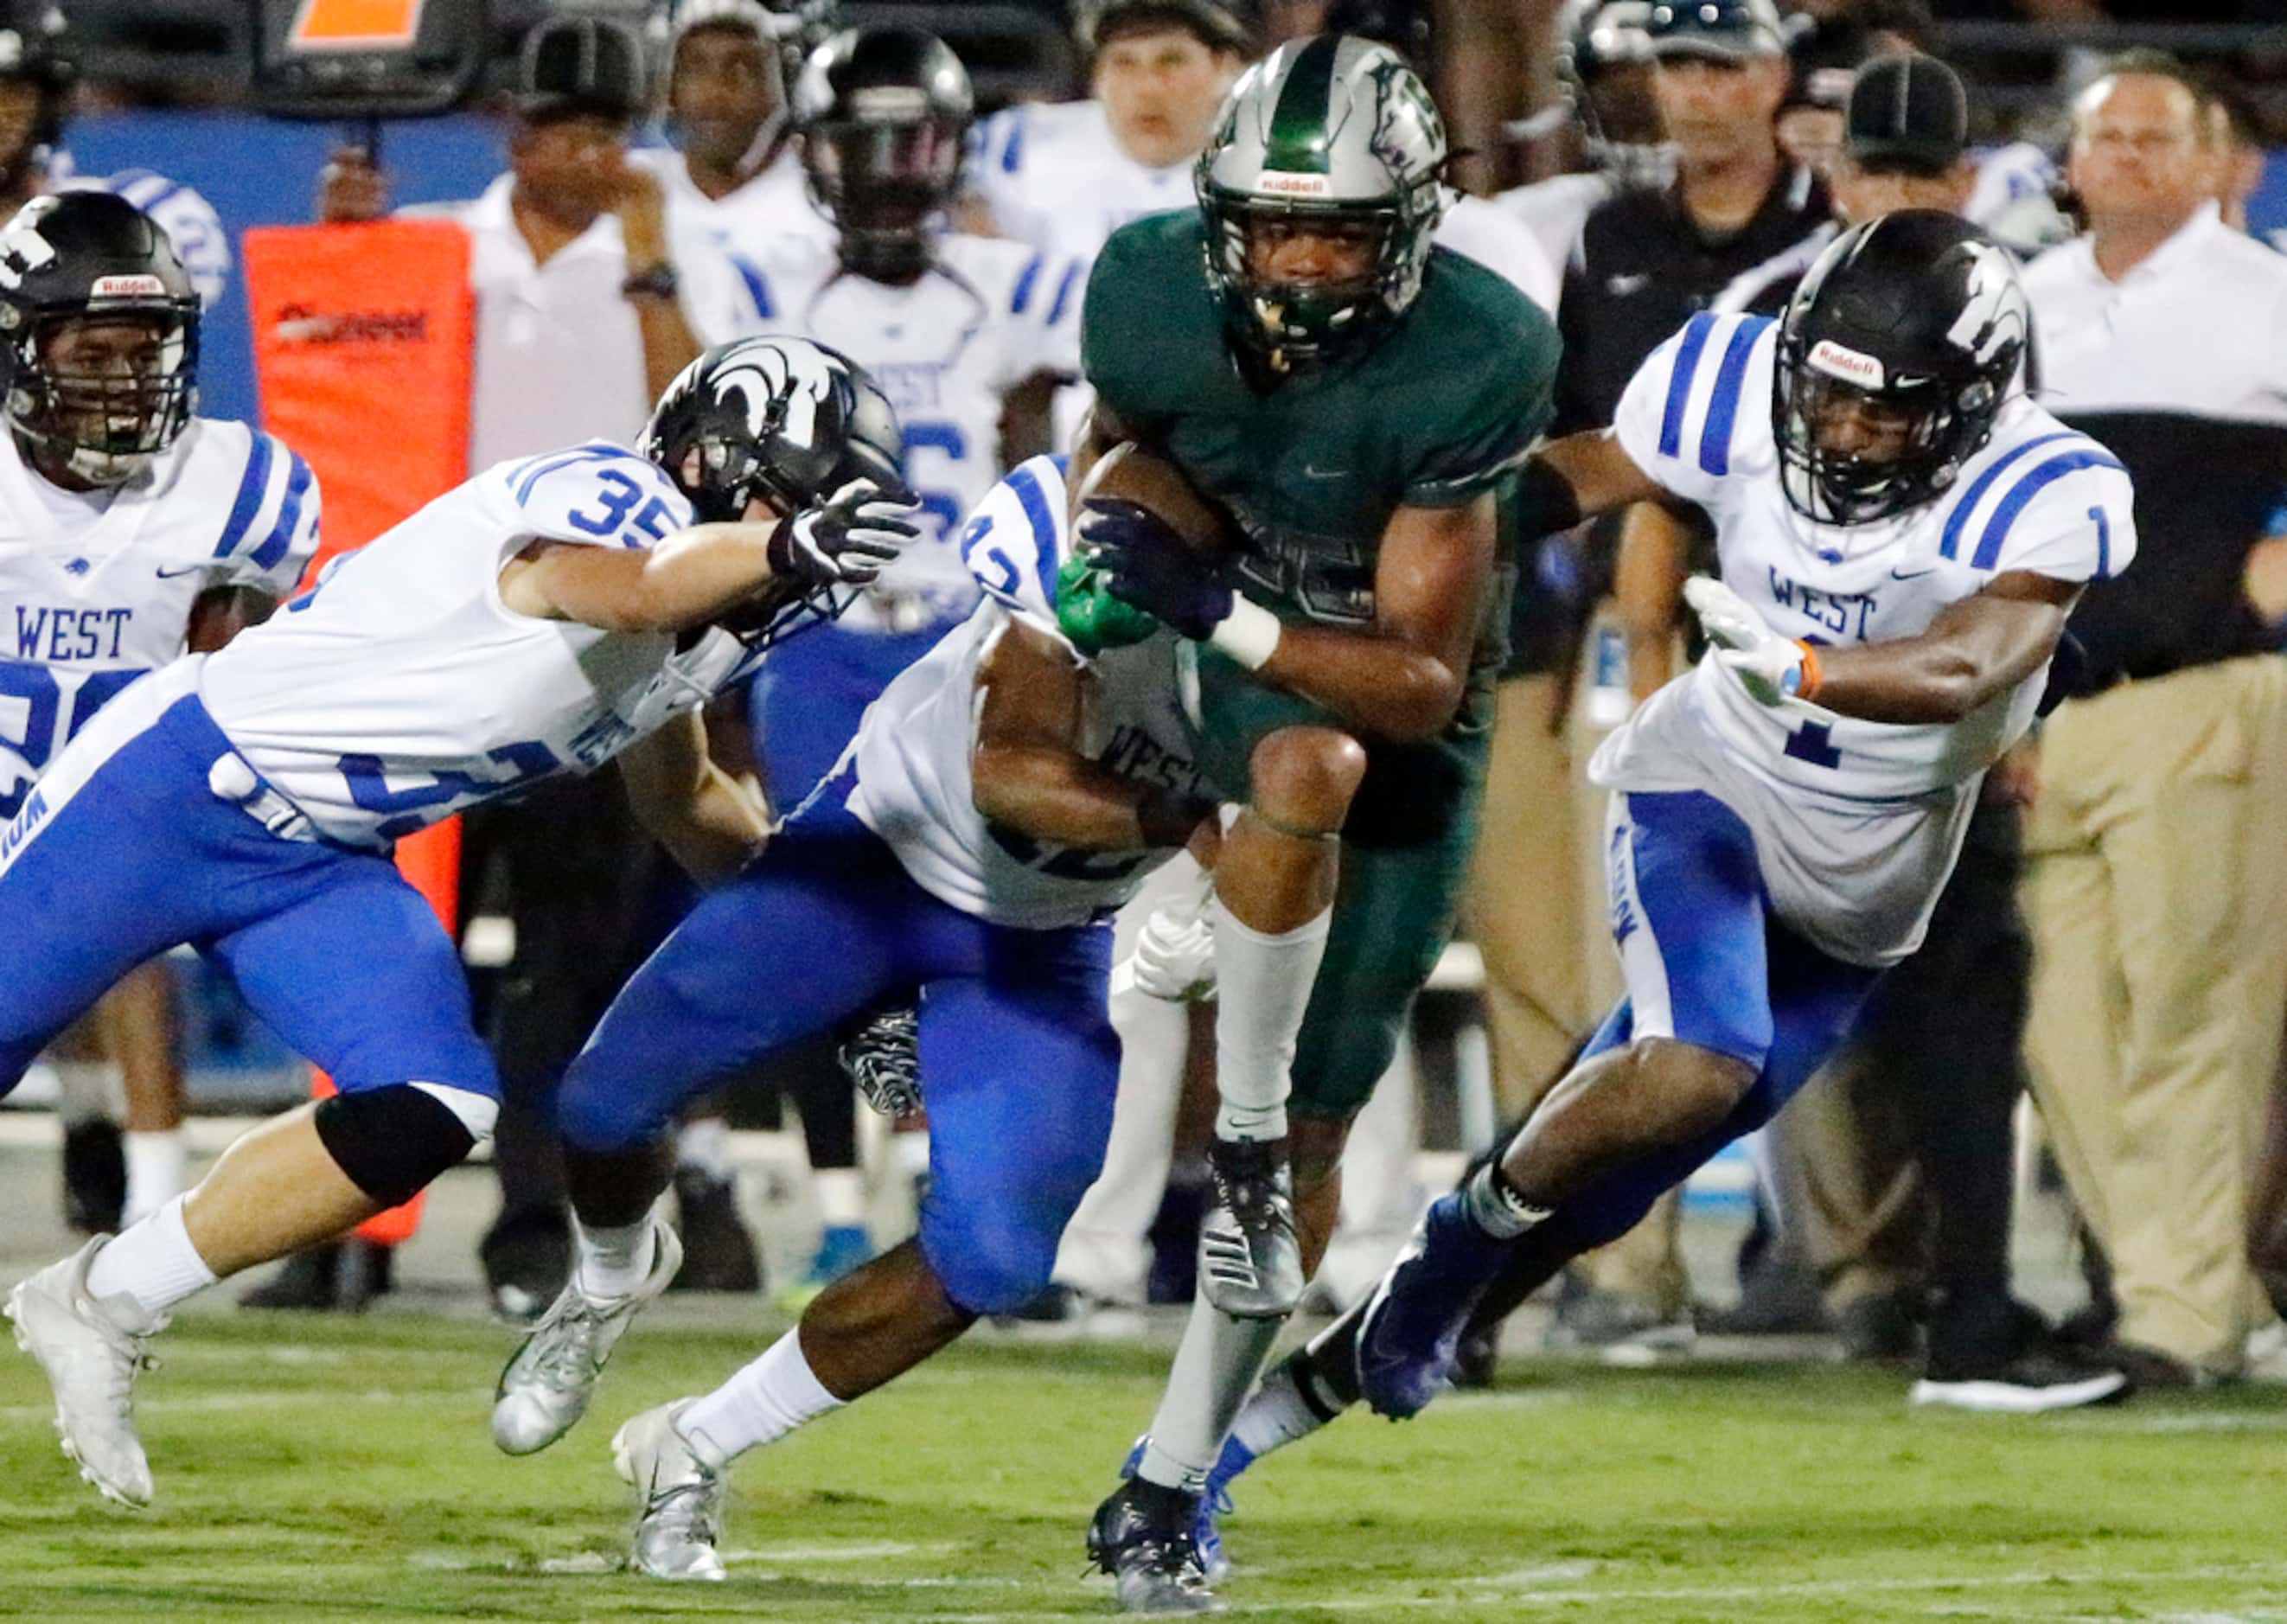 Reedy High School wide receiver Zion Washington (15) breaks free from a host of defenders to...